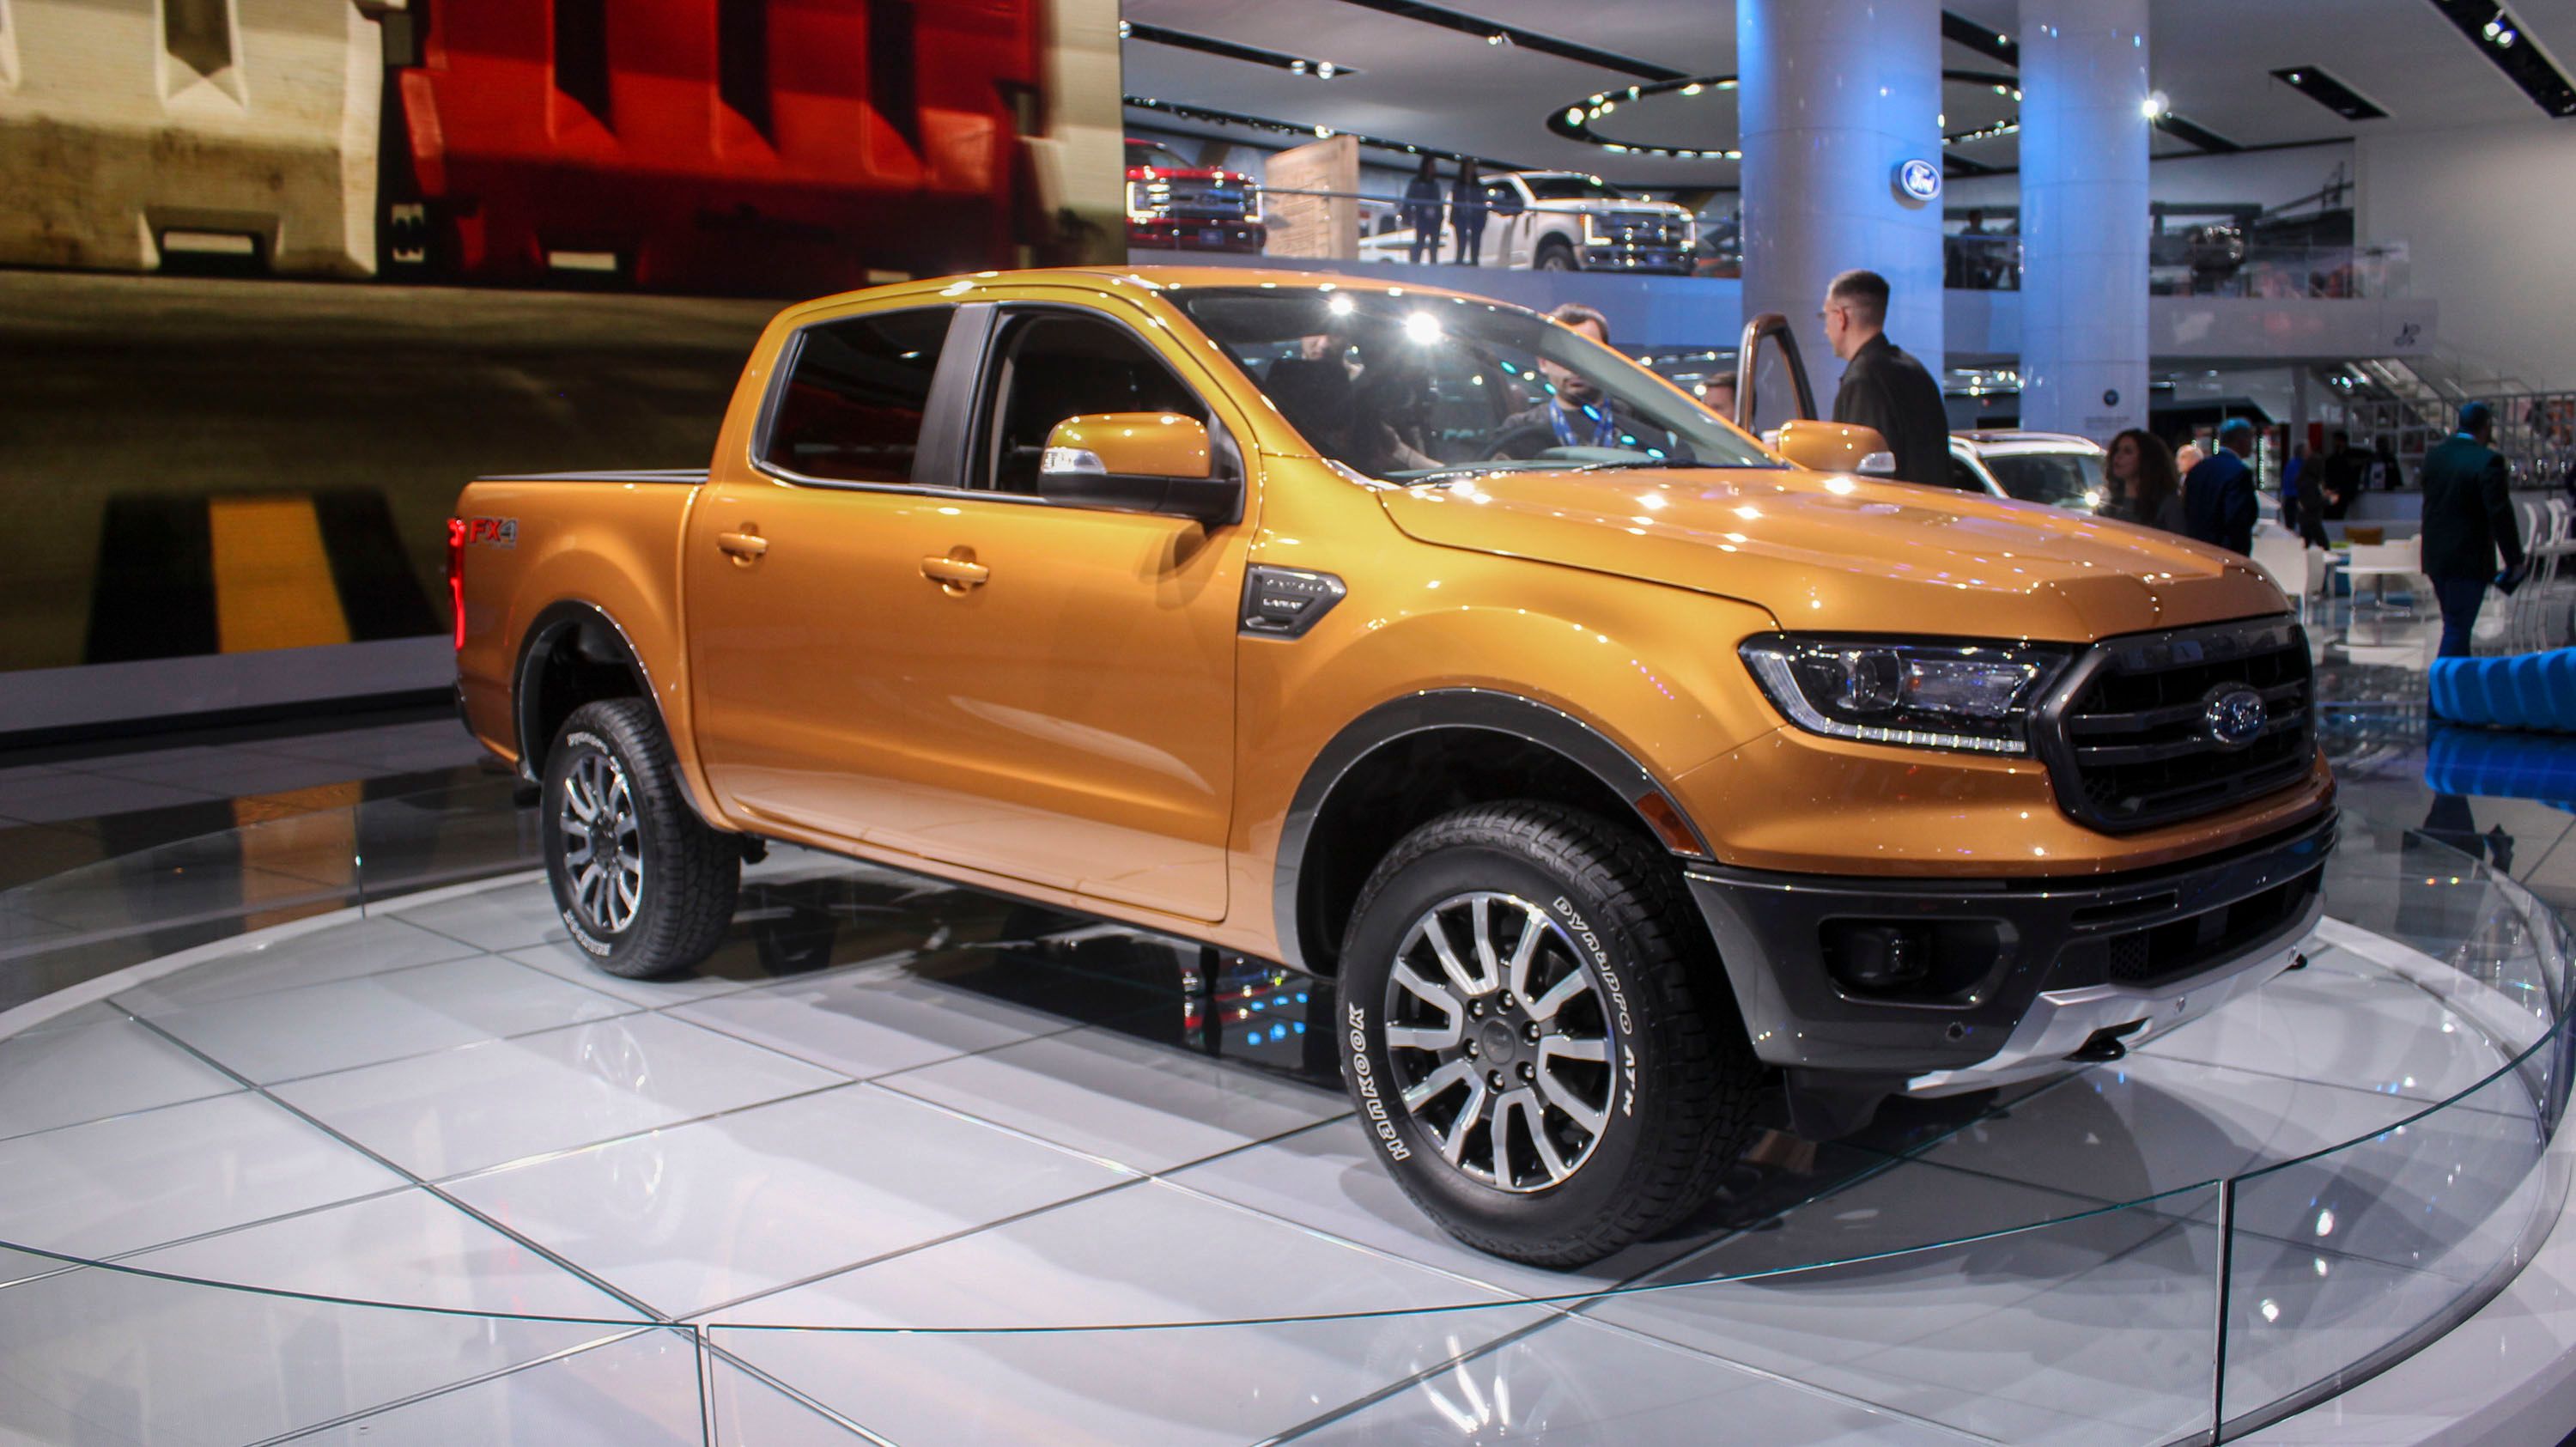 2018 One Minute News: The U.S.-Spec Ford Ranger Won’t be Offered in Single-Cab Form